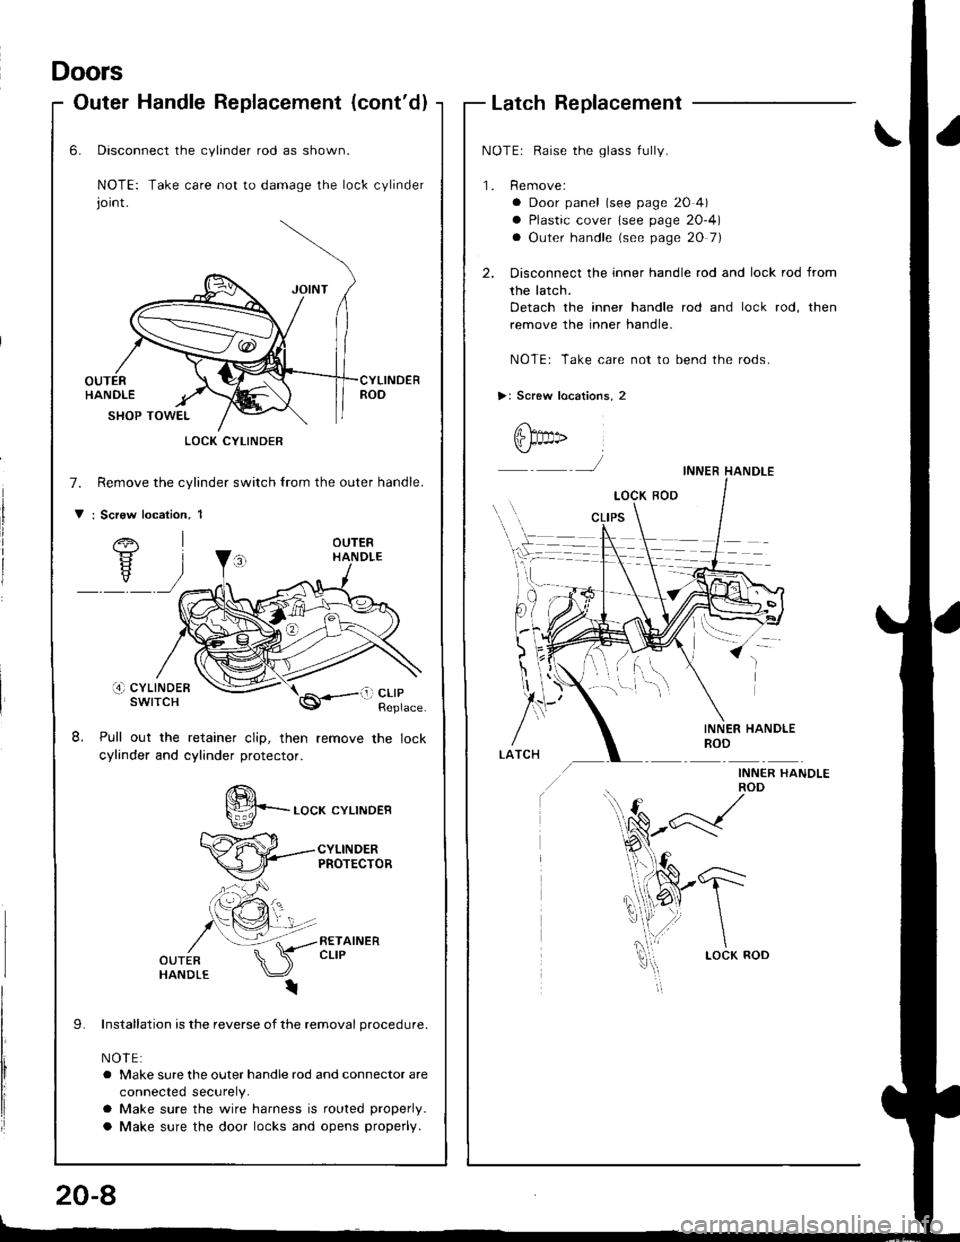 HONDA INTEGRA 1998 4.G Workshop Manual Doors
Outer Handle Replacement (contdlLatch Replacement
NOTEr Raise the glass fully.
1. Remove:
a Door panel (see page 20 4)
a Plastic cover lsee page 20-4)
a Outer handle (see page 20 7)
2. Disconn